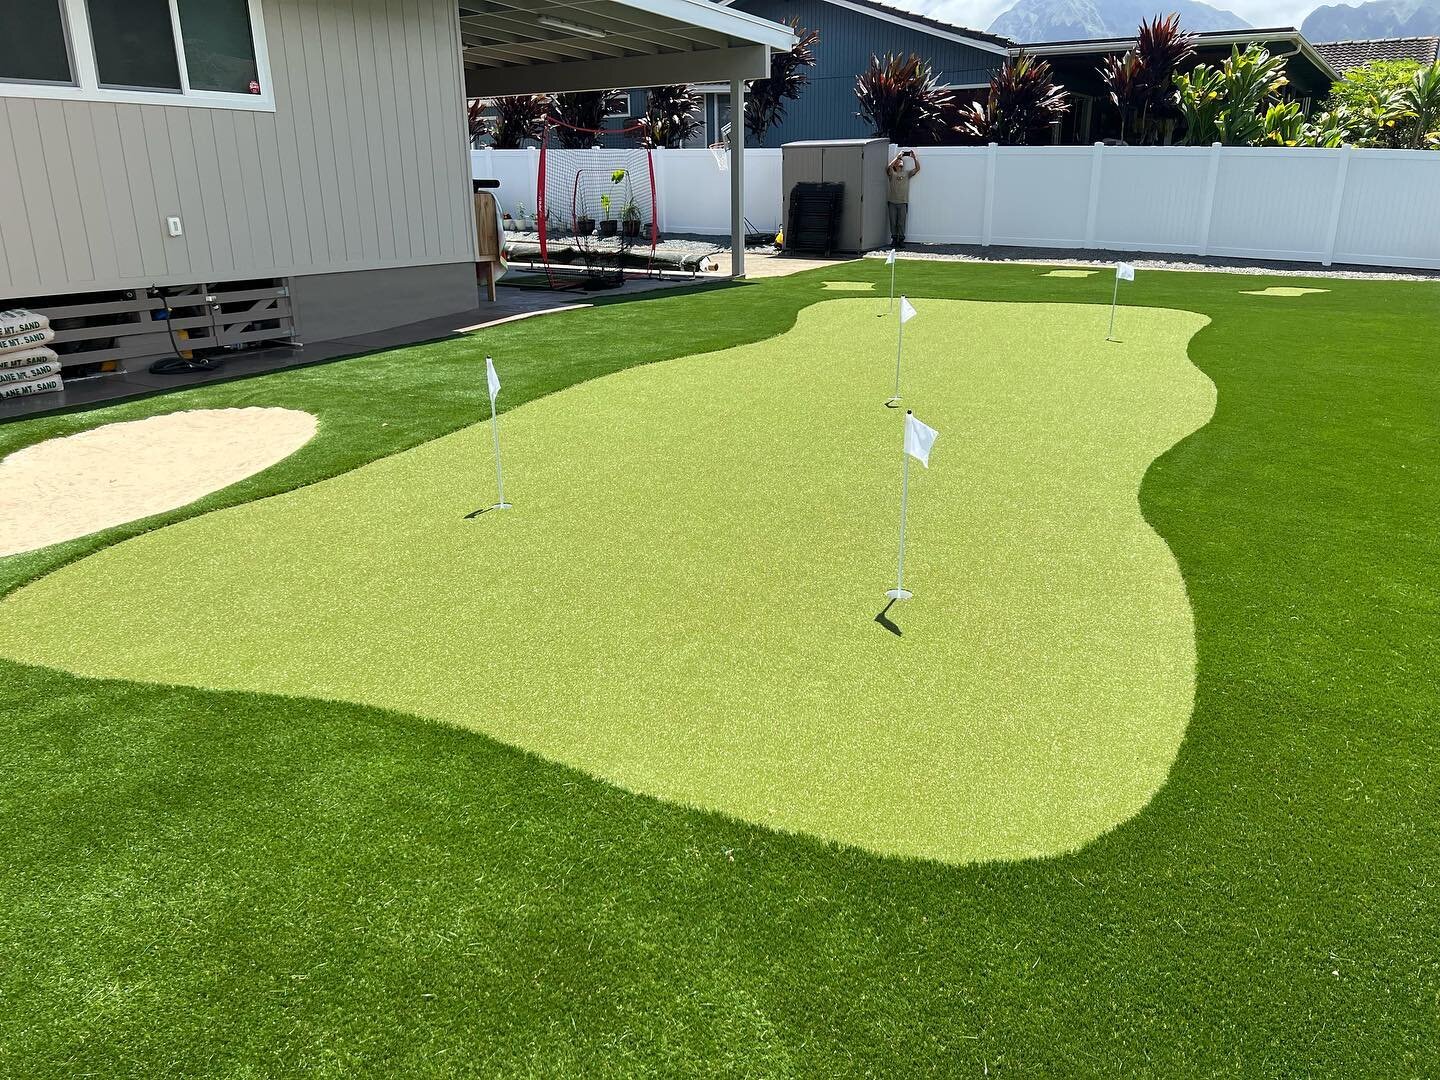 🏌🏽⛳️ #5931864
#SYNlawnOahu #Hawaiilandscaping #SyntheticTurf #ArtificialGrass #Turf #Grass #SynLawn #lifetimewarranty #biobasedproducts #savewater #savetime #getyourweekendsback #Alohaeveryday #SYNLawn #ArchitectKit #commerciallandscaping  #greenes